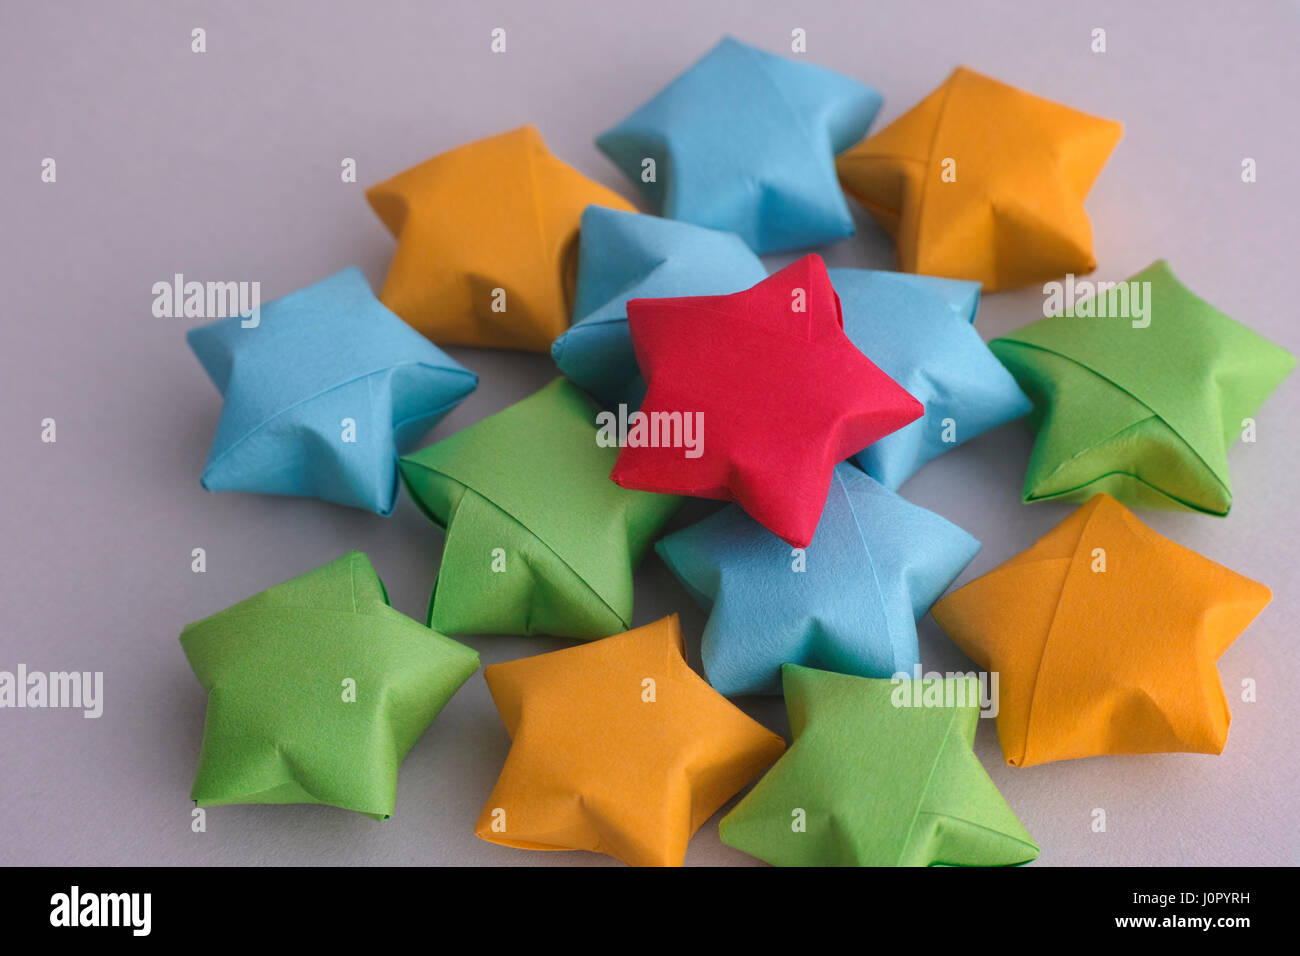 Colorful origami lucky stars on gray paper background. Stock Photo